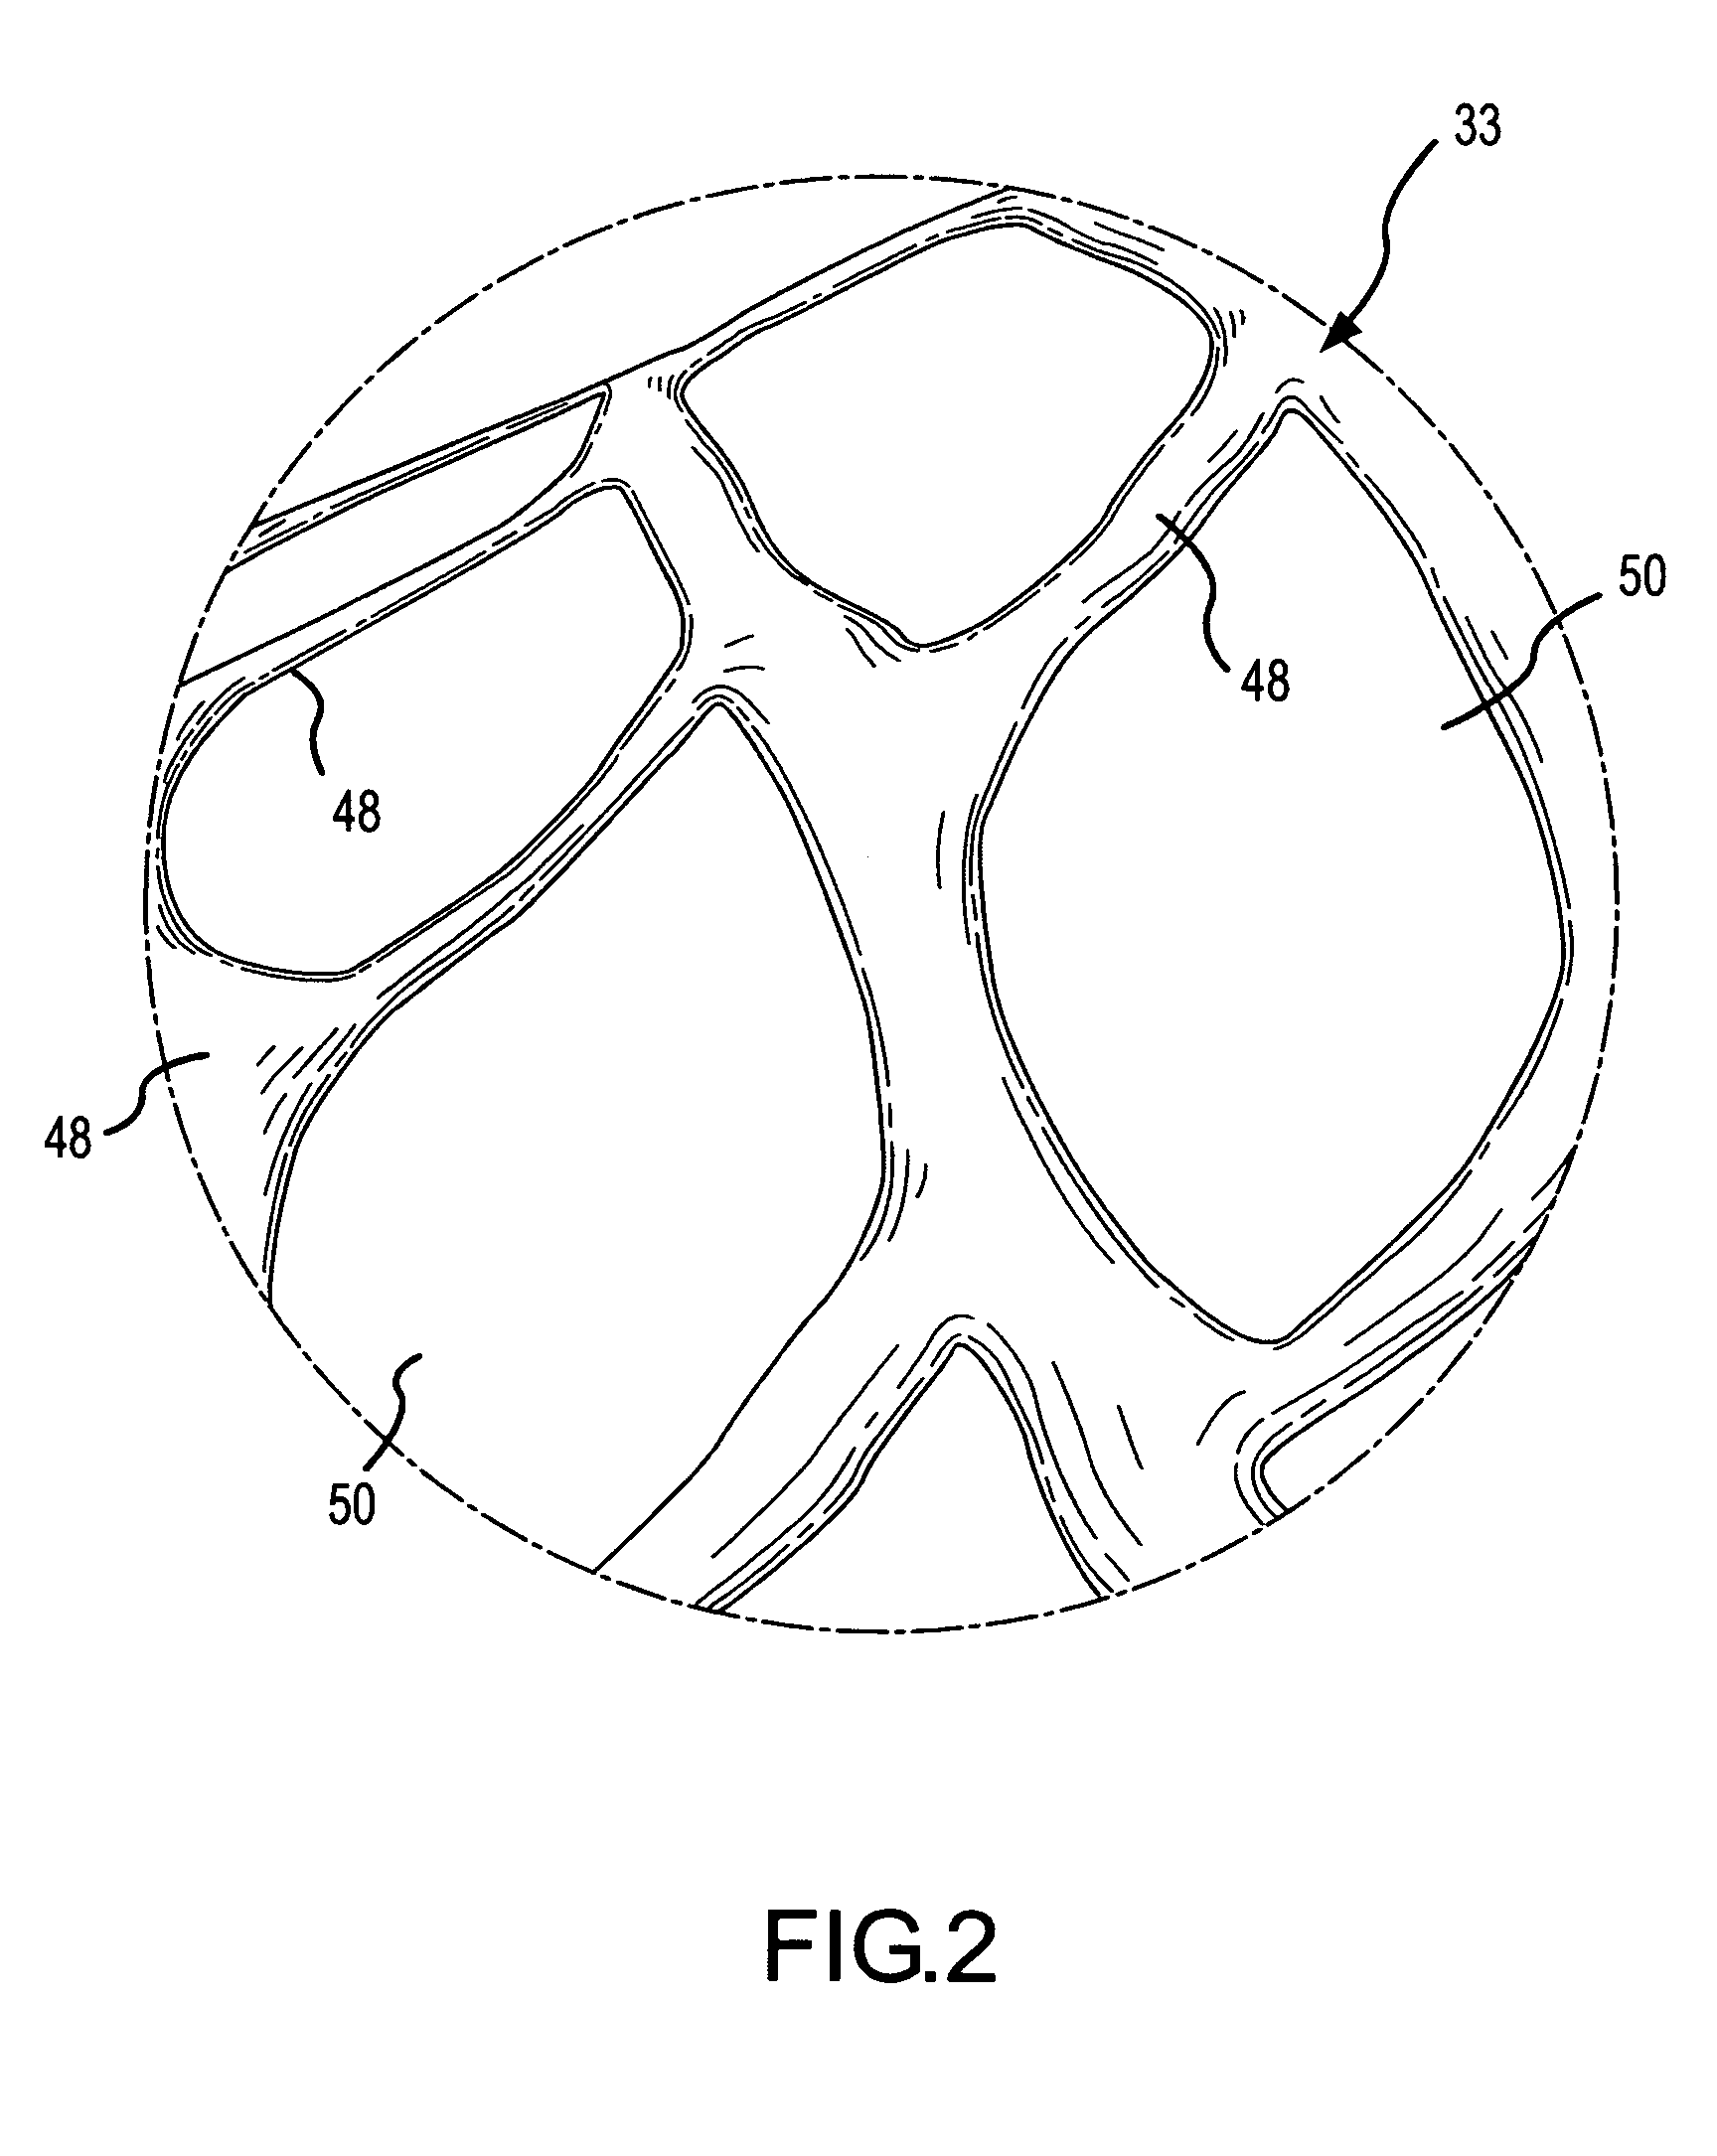 Porous tubular device and method for controlling windblown particle stabilization deposition and retention